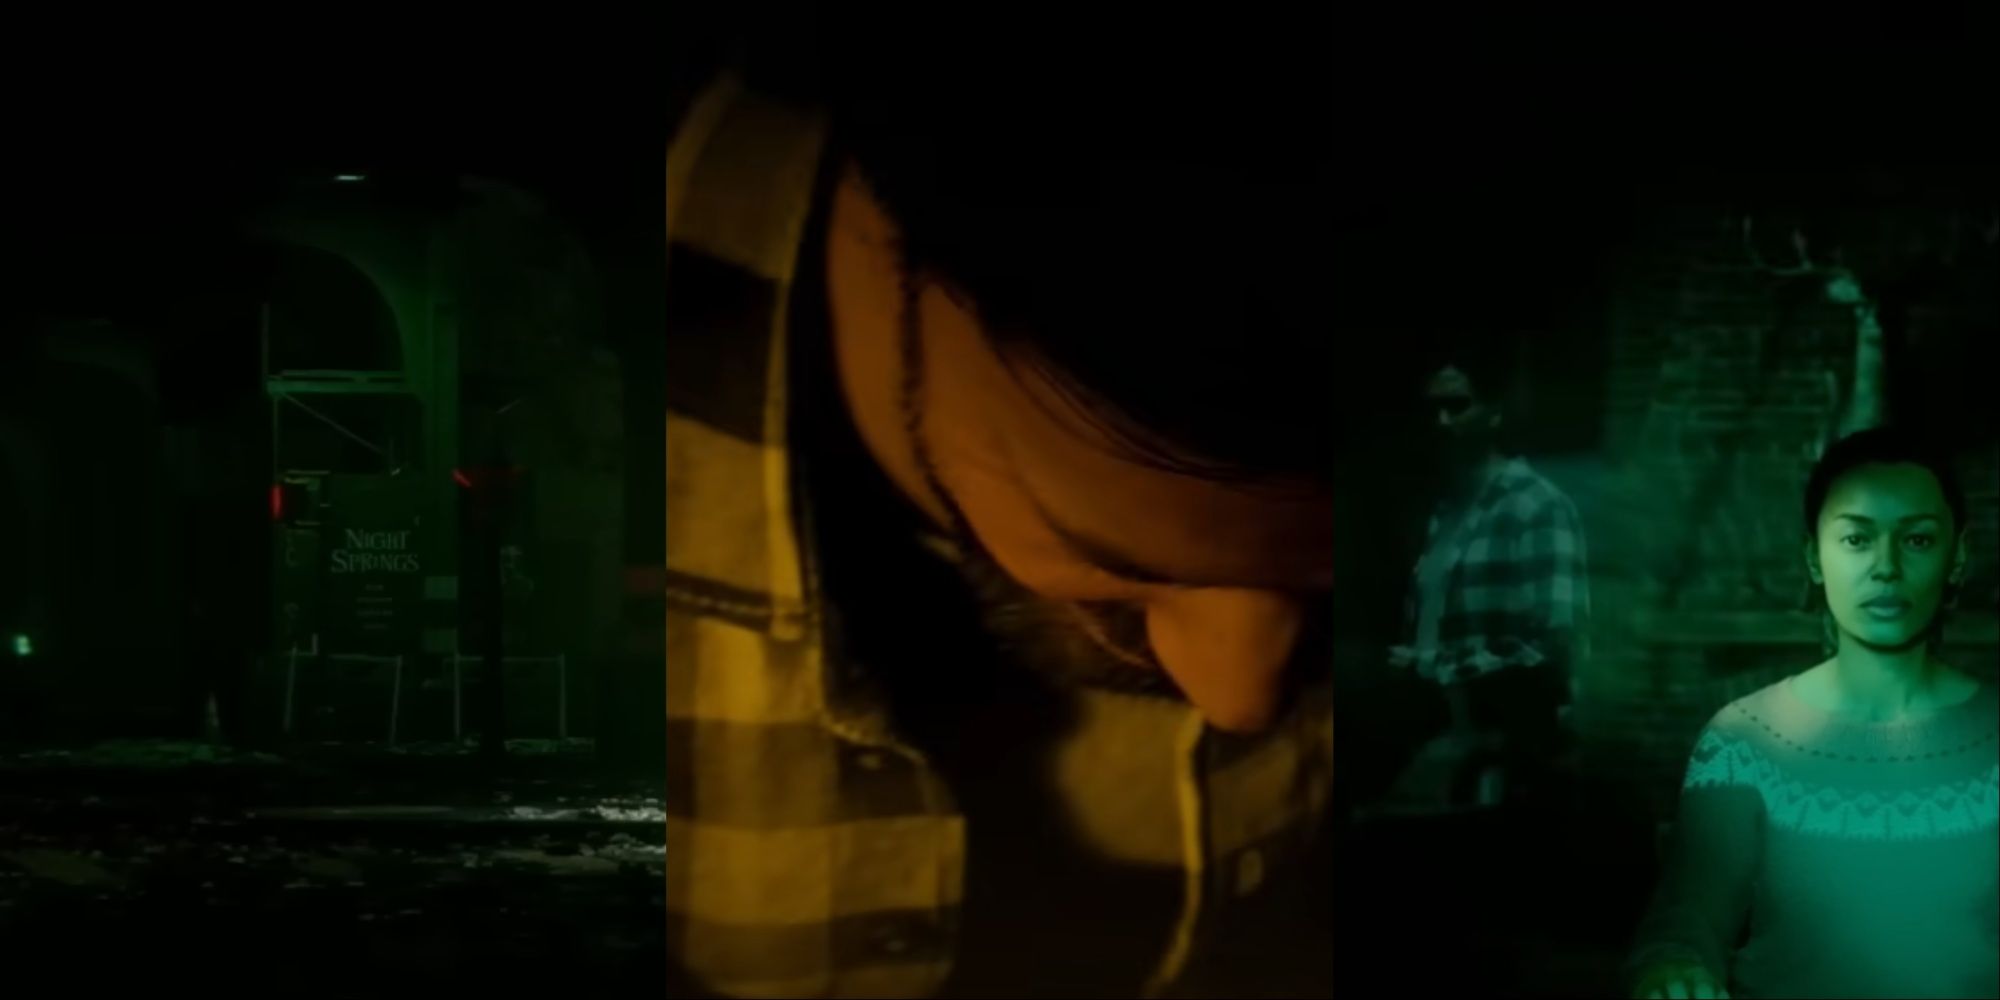 Everything we learned in the new Alan Wake 2 trailer, lance